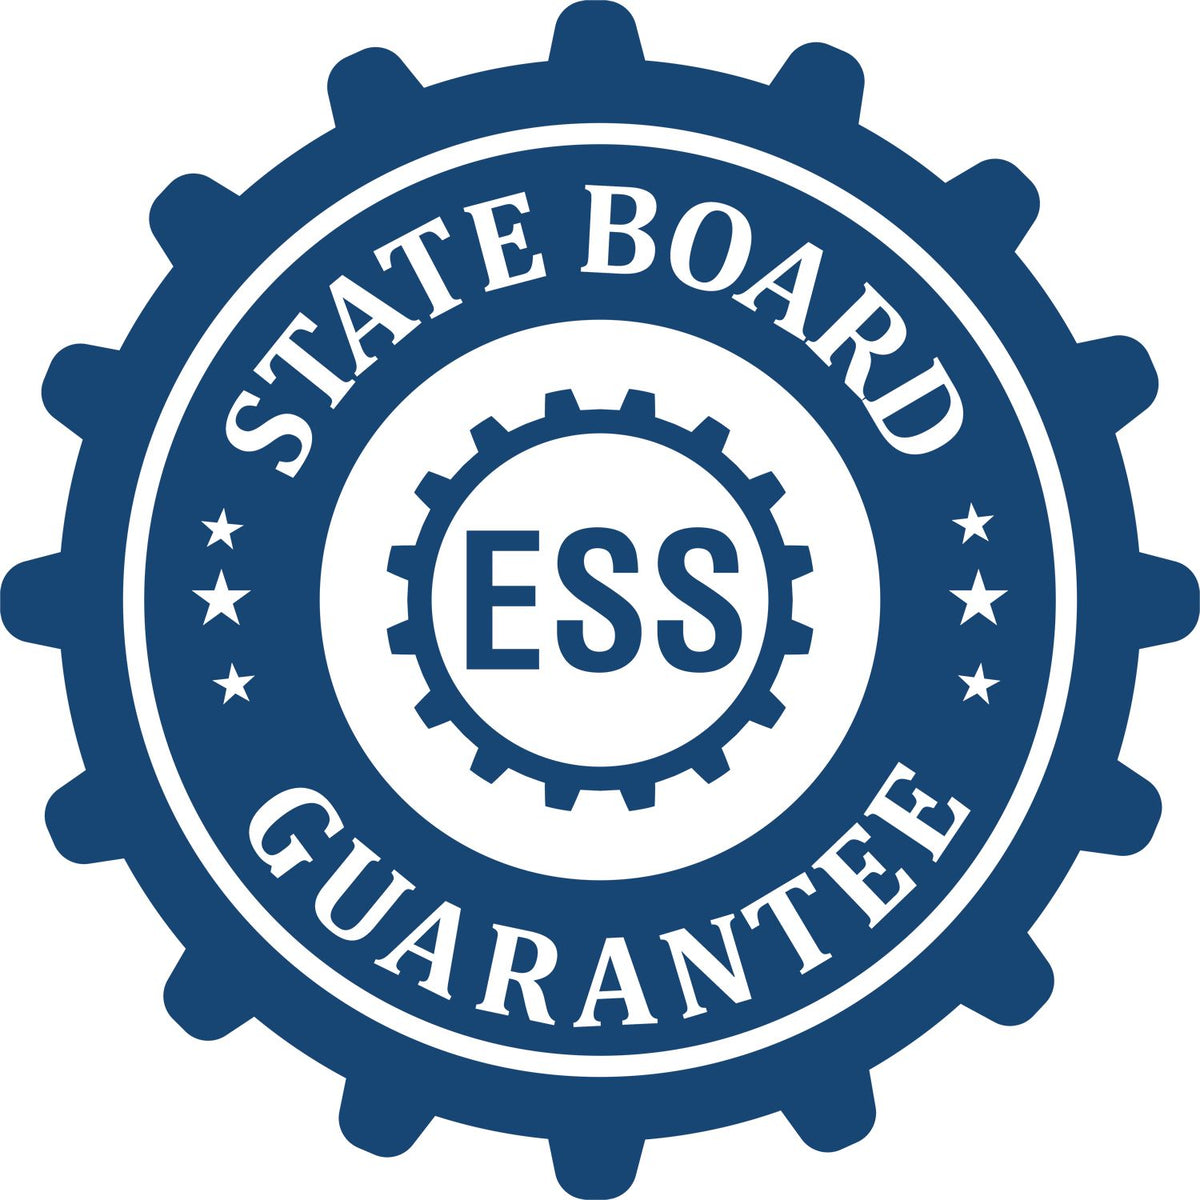 An emblem in a gear shape illustrating a state board guarantee for the Premium MaxLight Pre-Inked Vermont Engineering Stamp product.